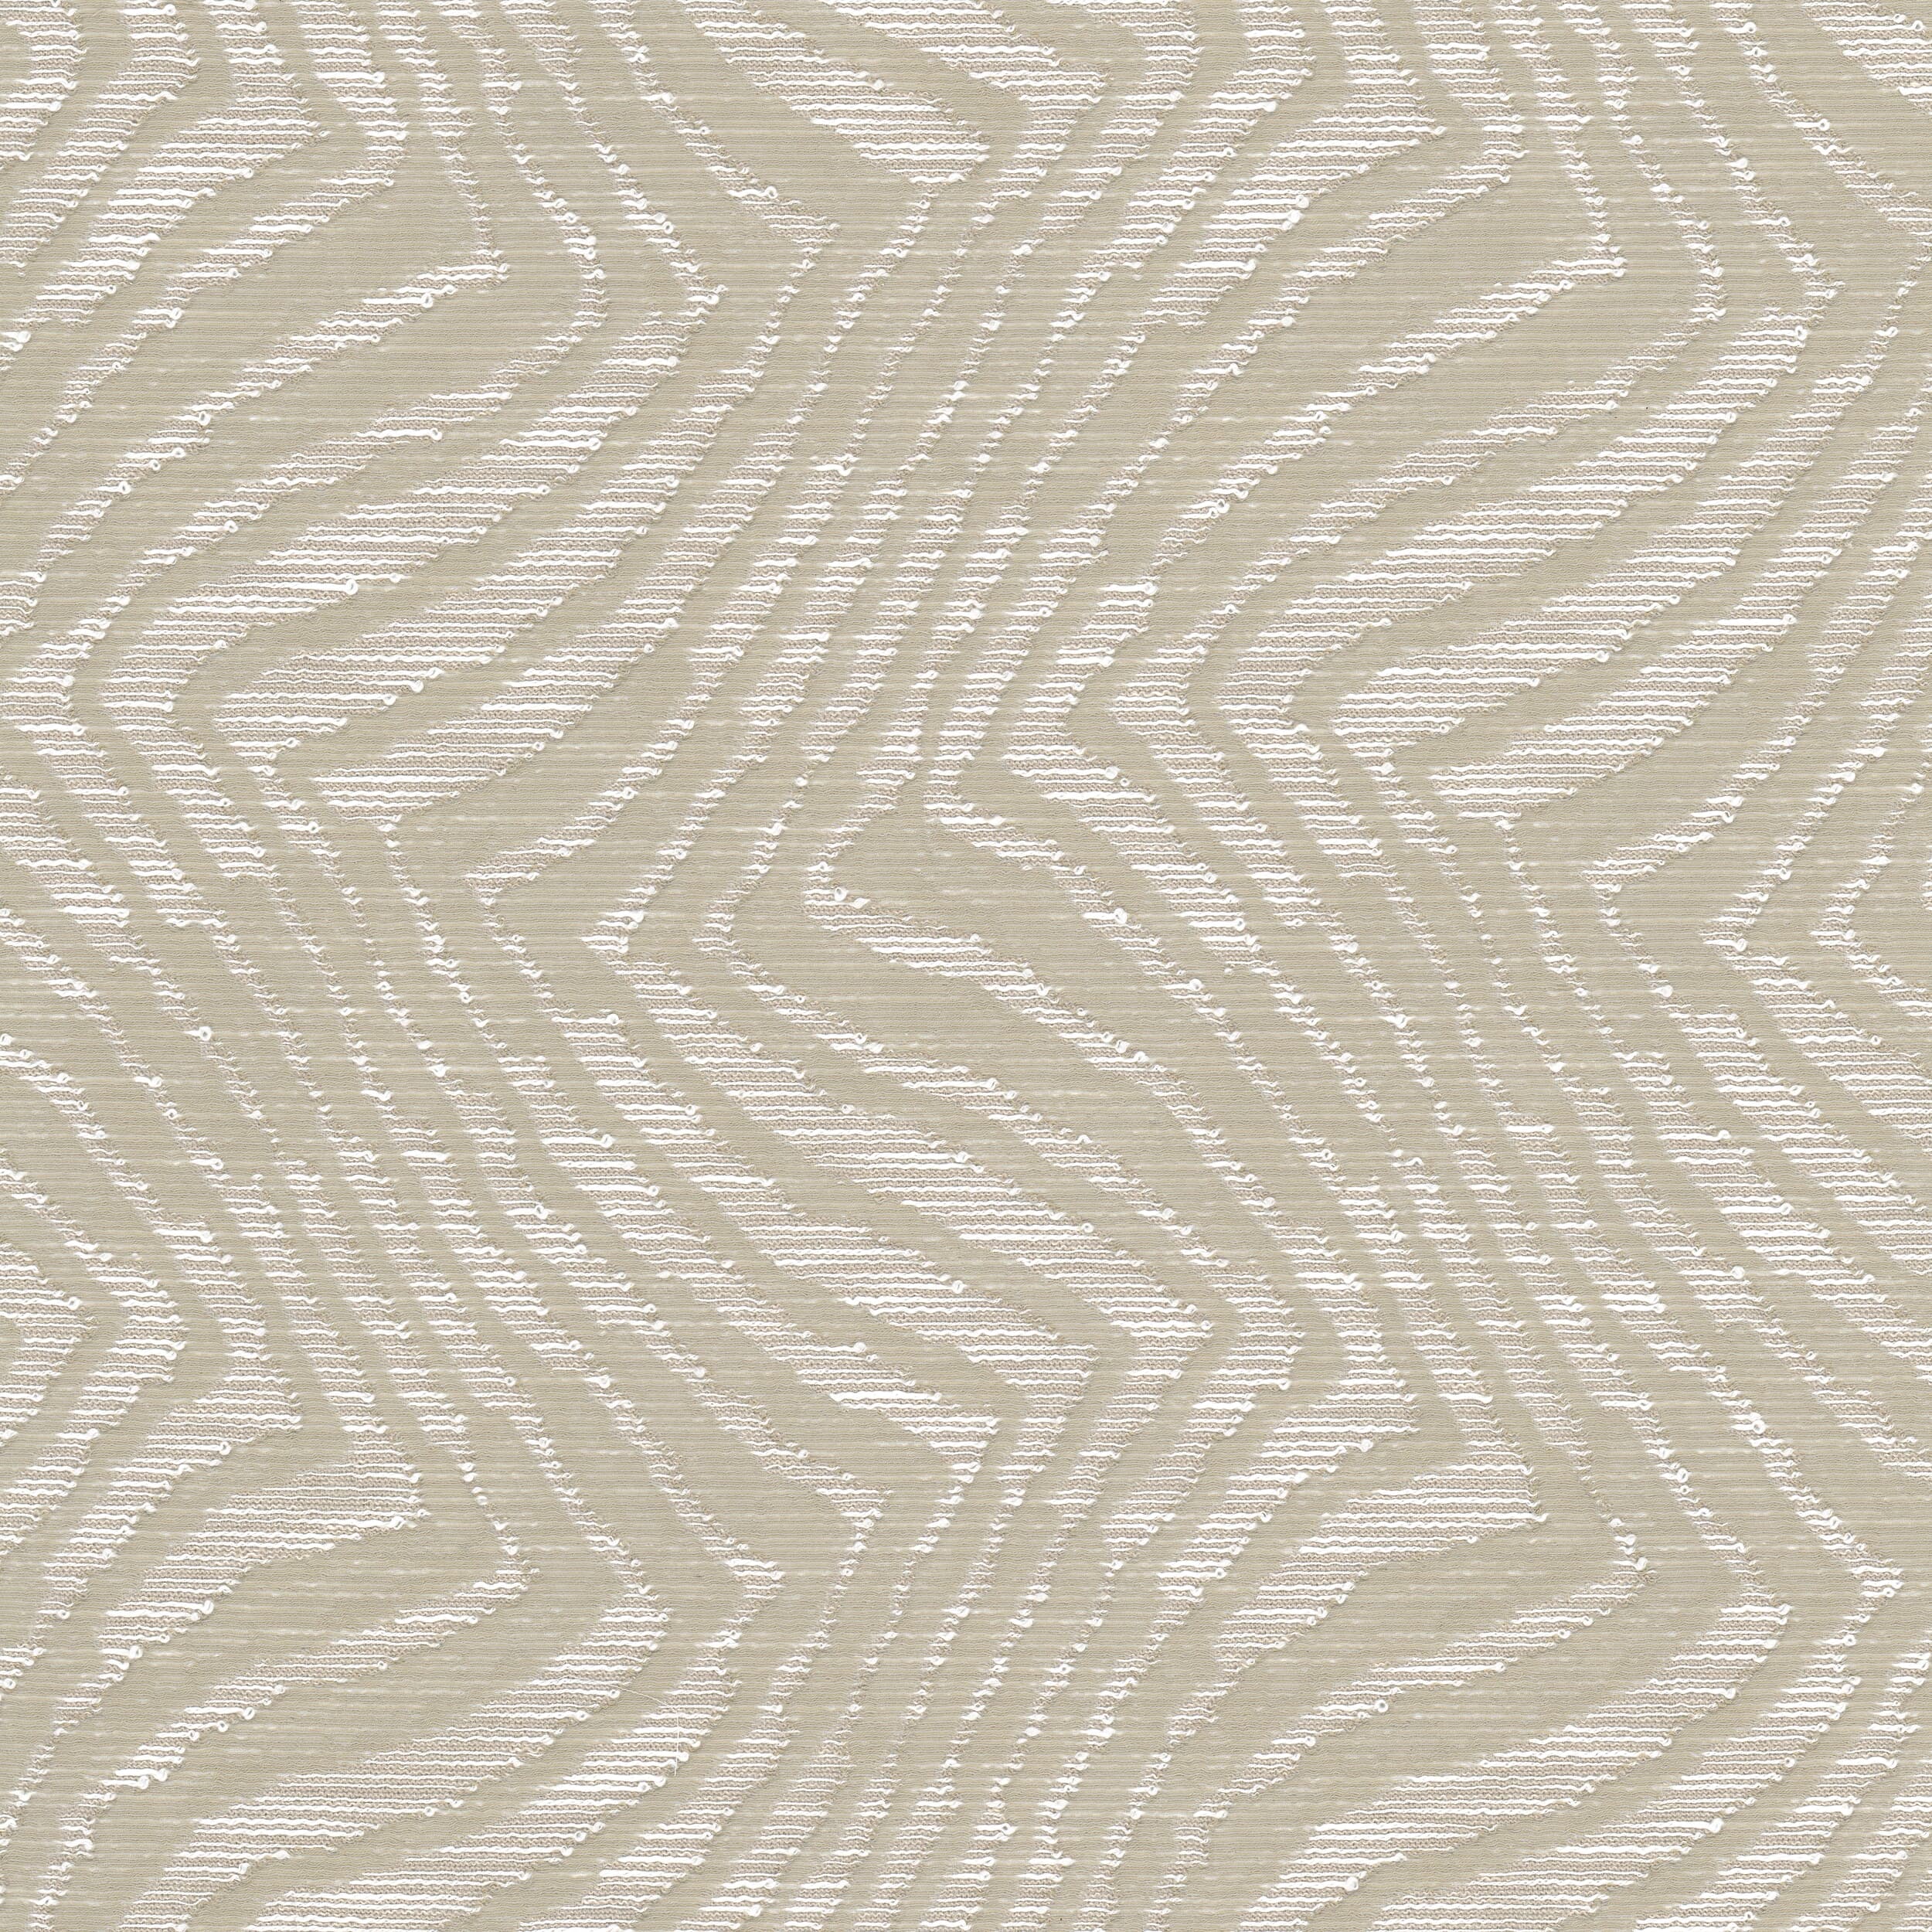 Tremont 3 Dusk by Stout Fabric